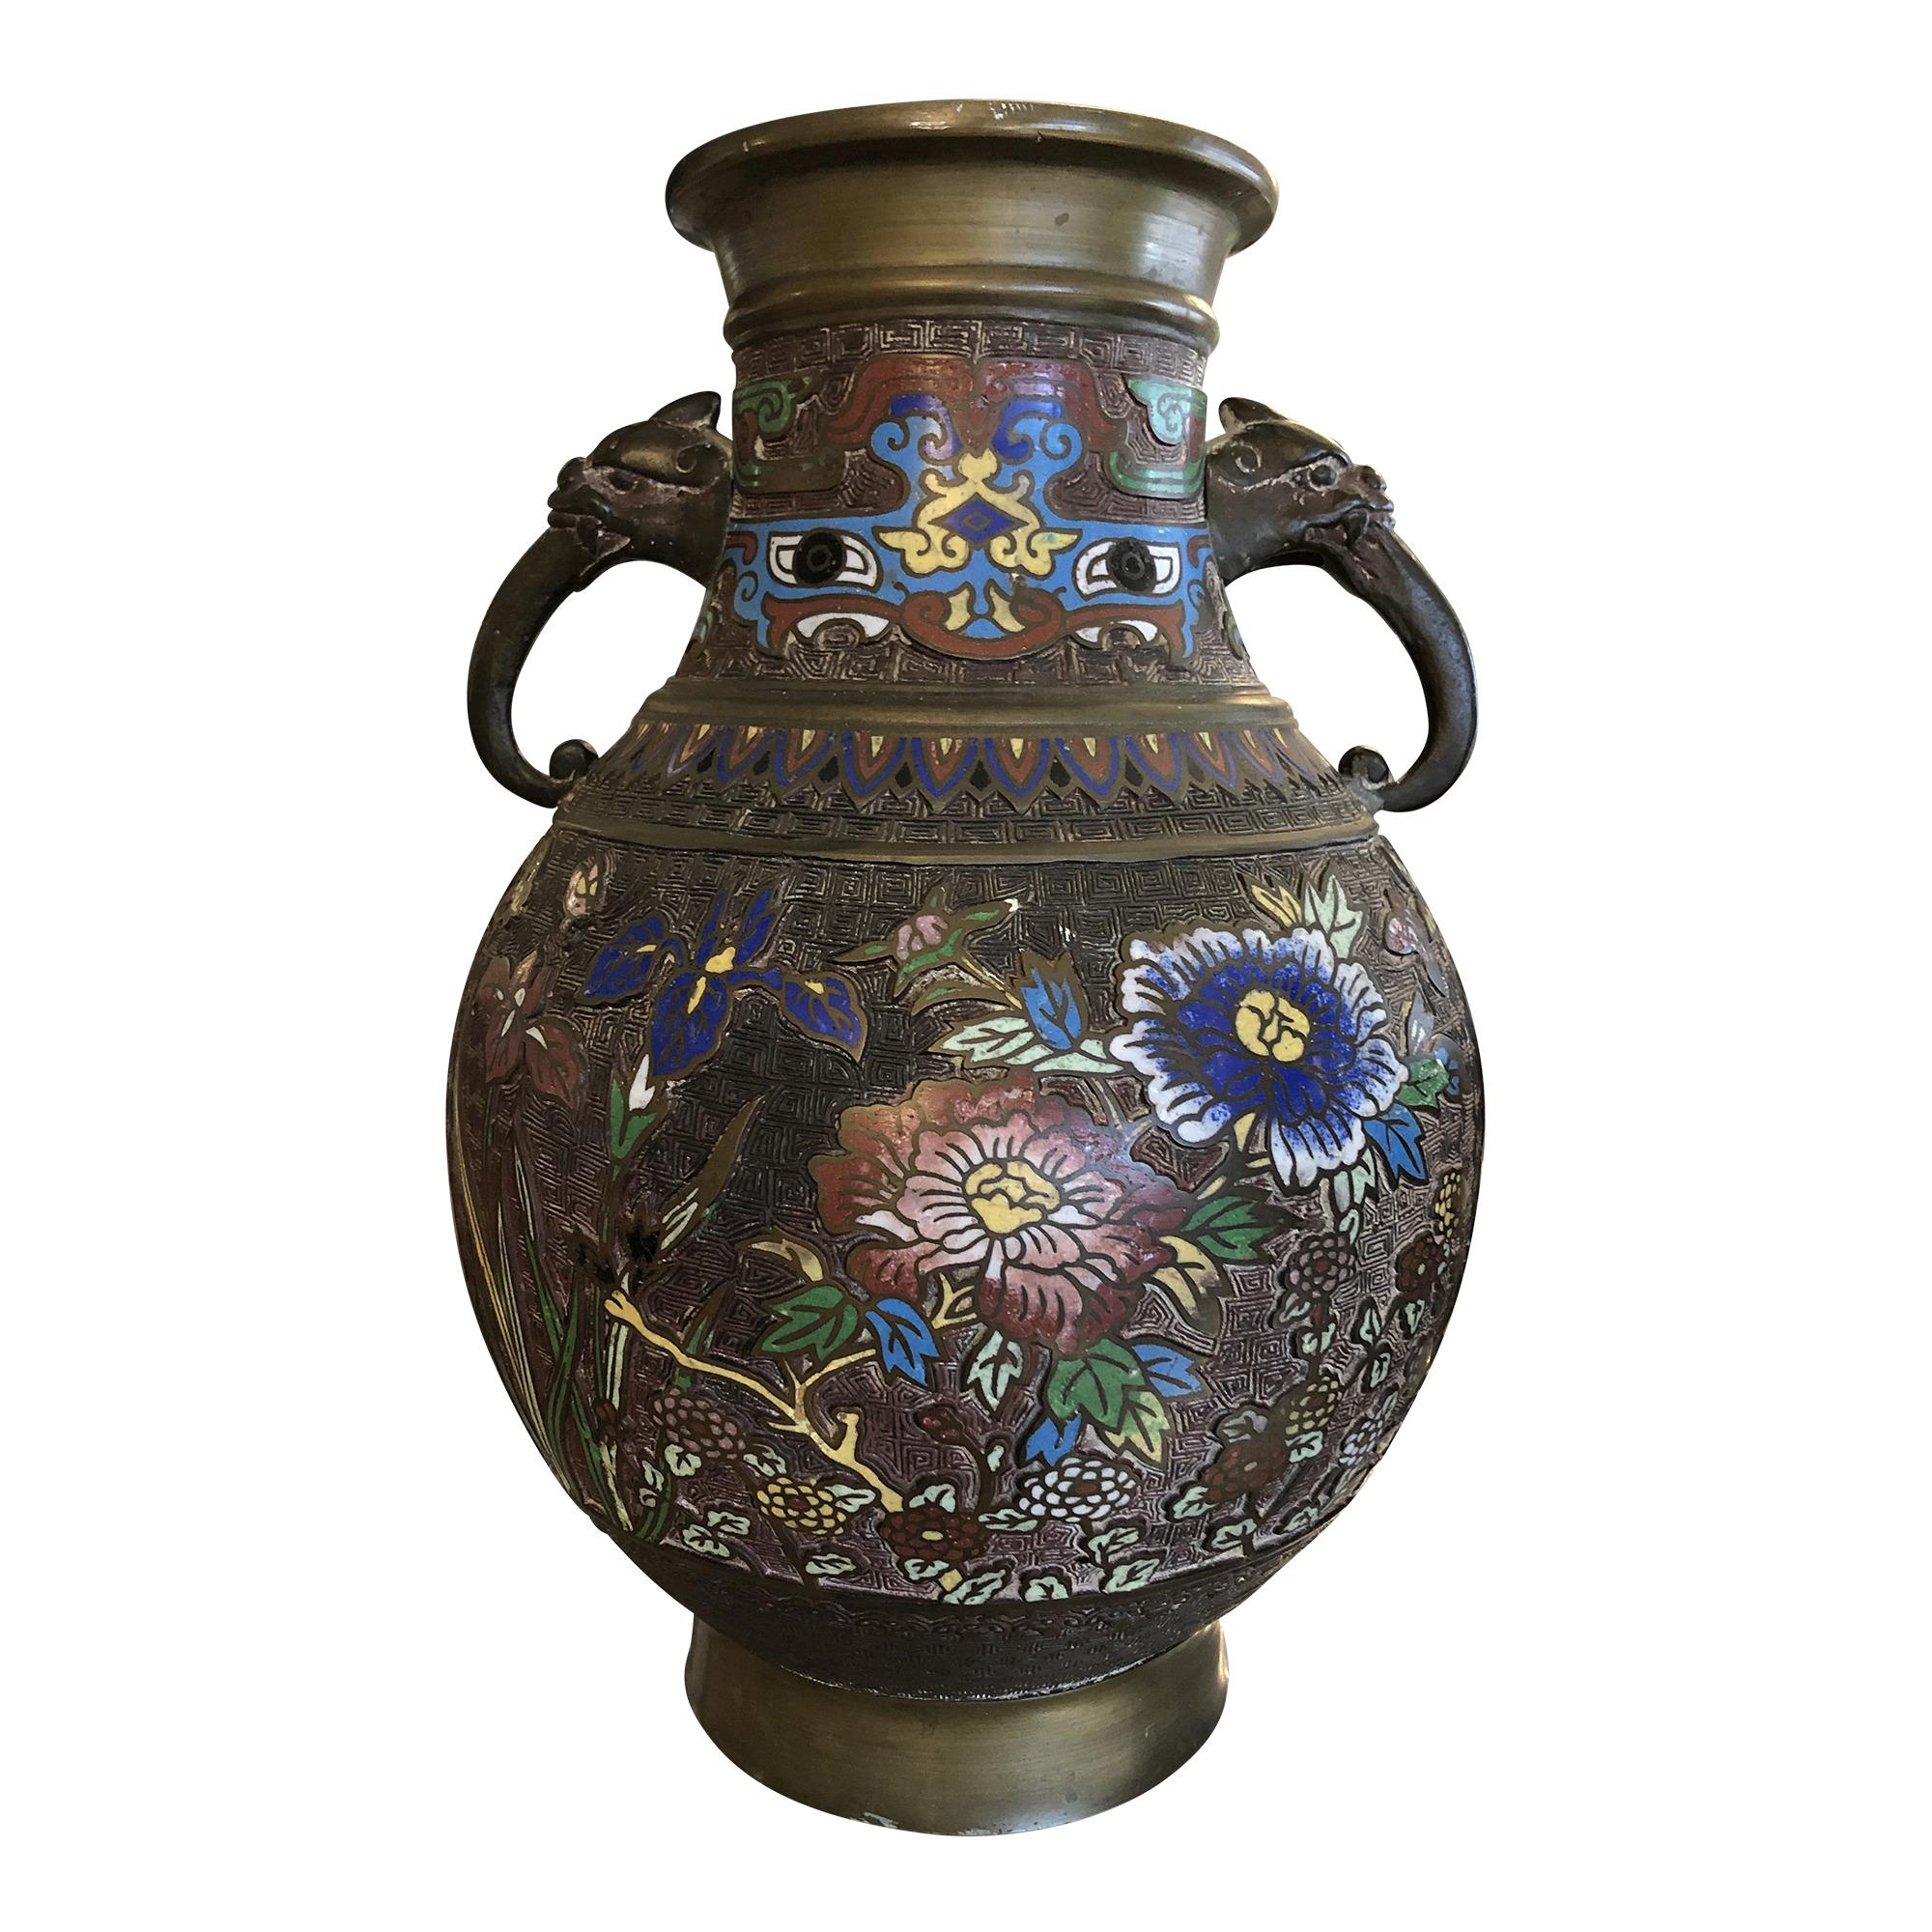 1930s Japanese Champleve Brass Vase with Enamel